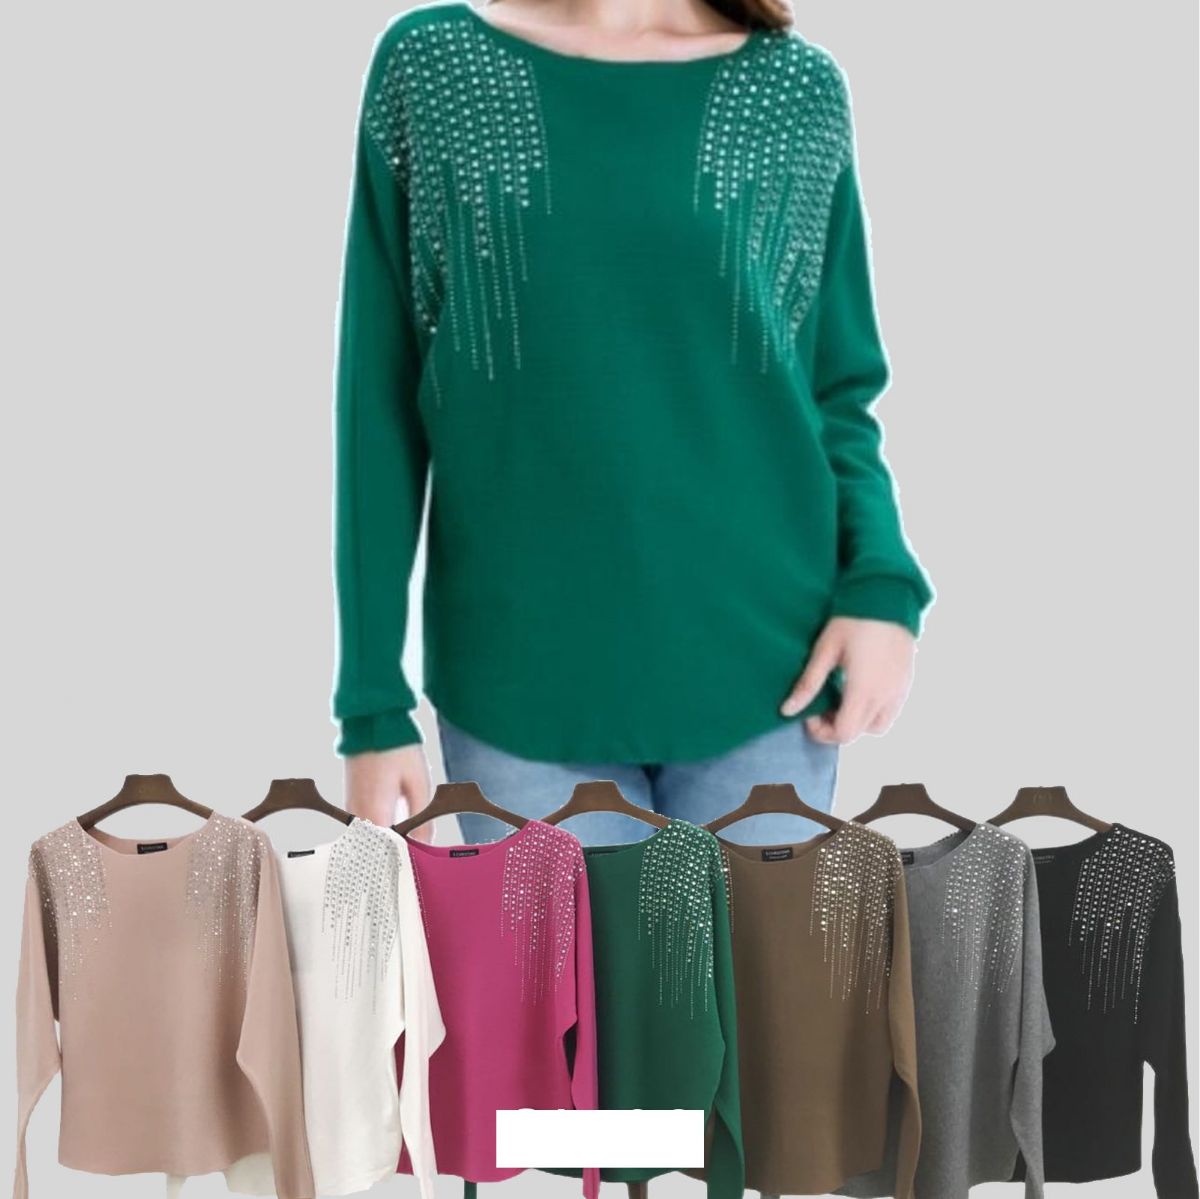 12 Pieces of Knitted Cashmere Baggy Sweater Rhinestone Design S/m